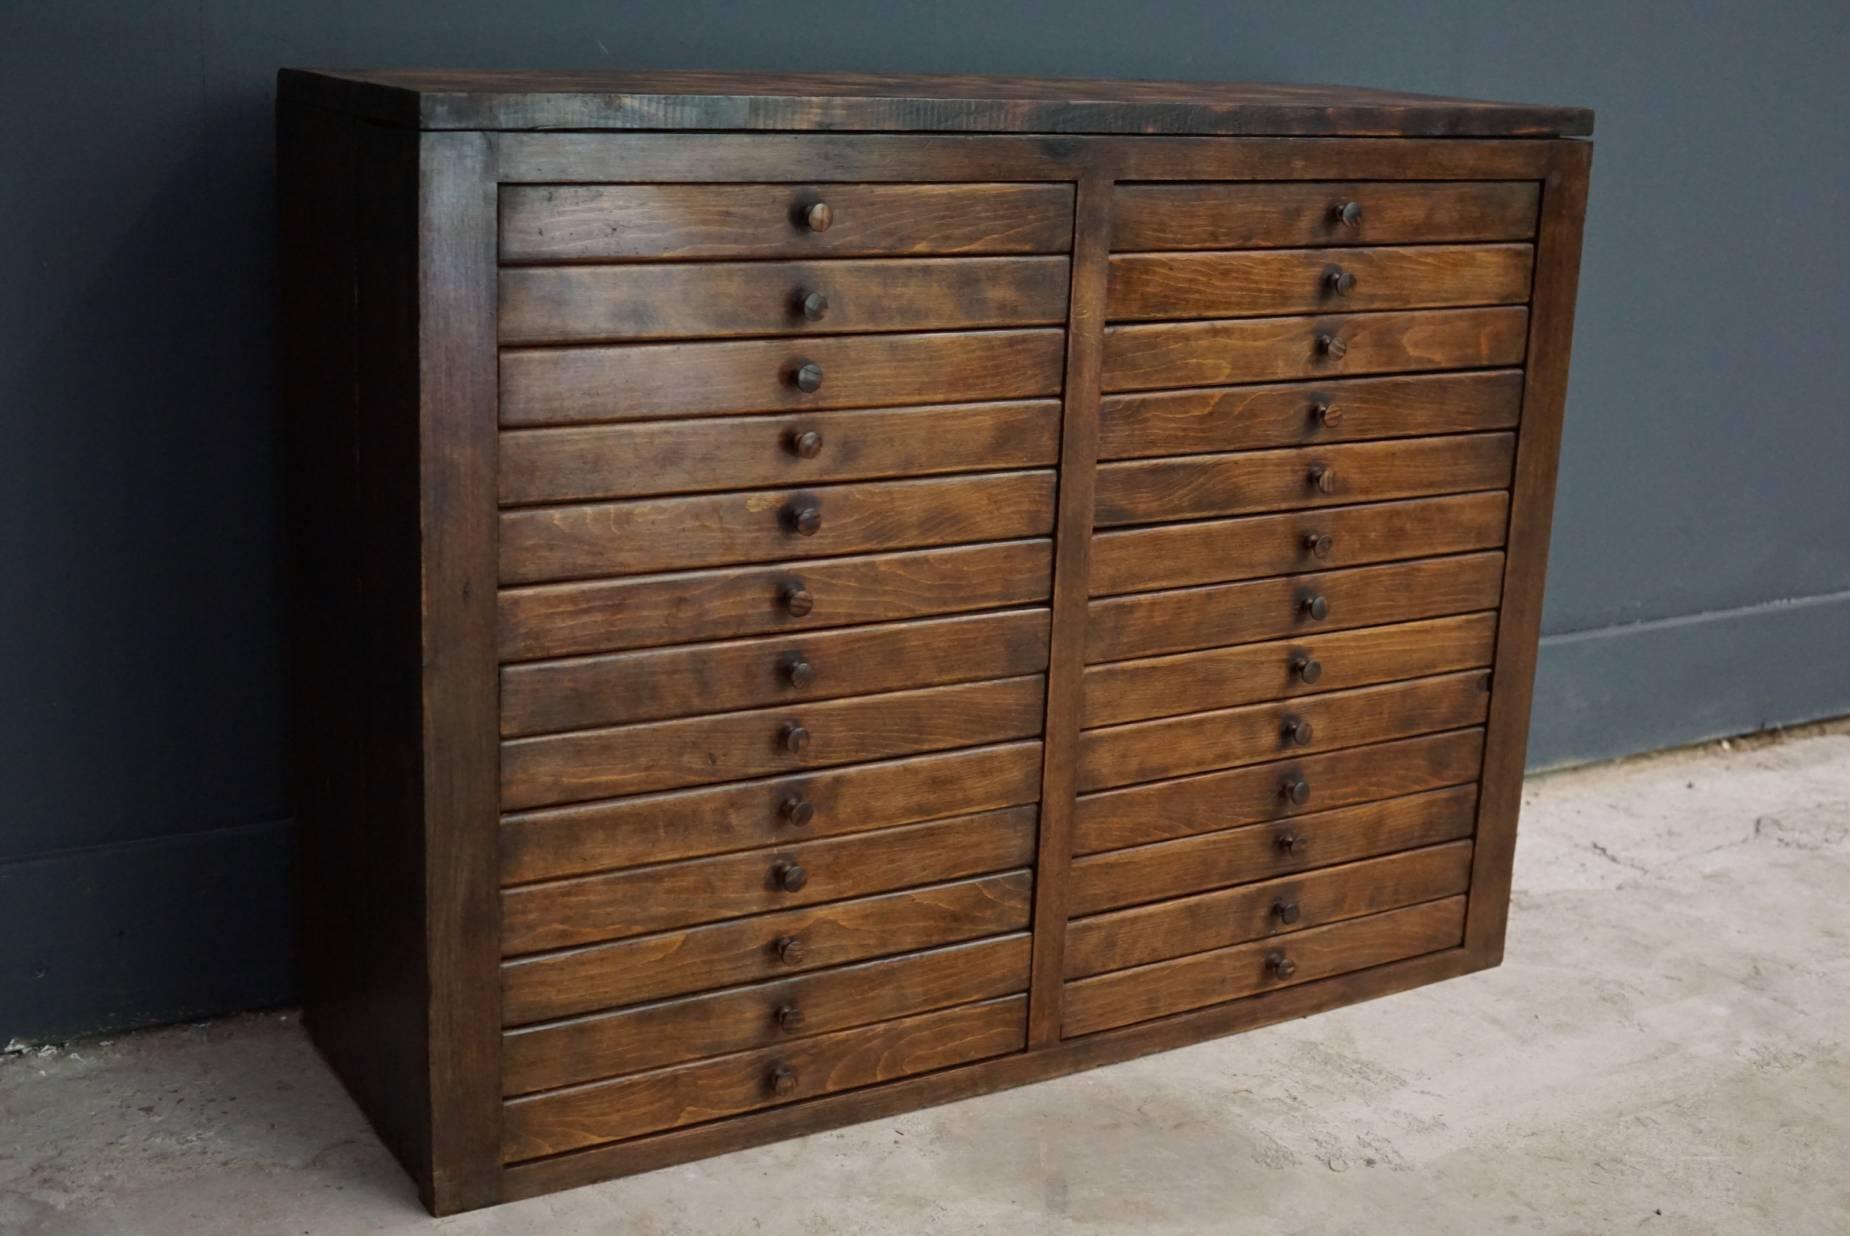 This pine jewelers cabinet was designed and made circa 1950s in France. It features 26 drawers with wooden knobs. It remains in a good vintage condition.